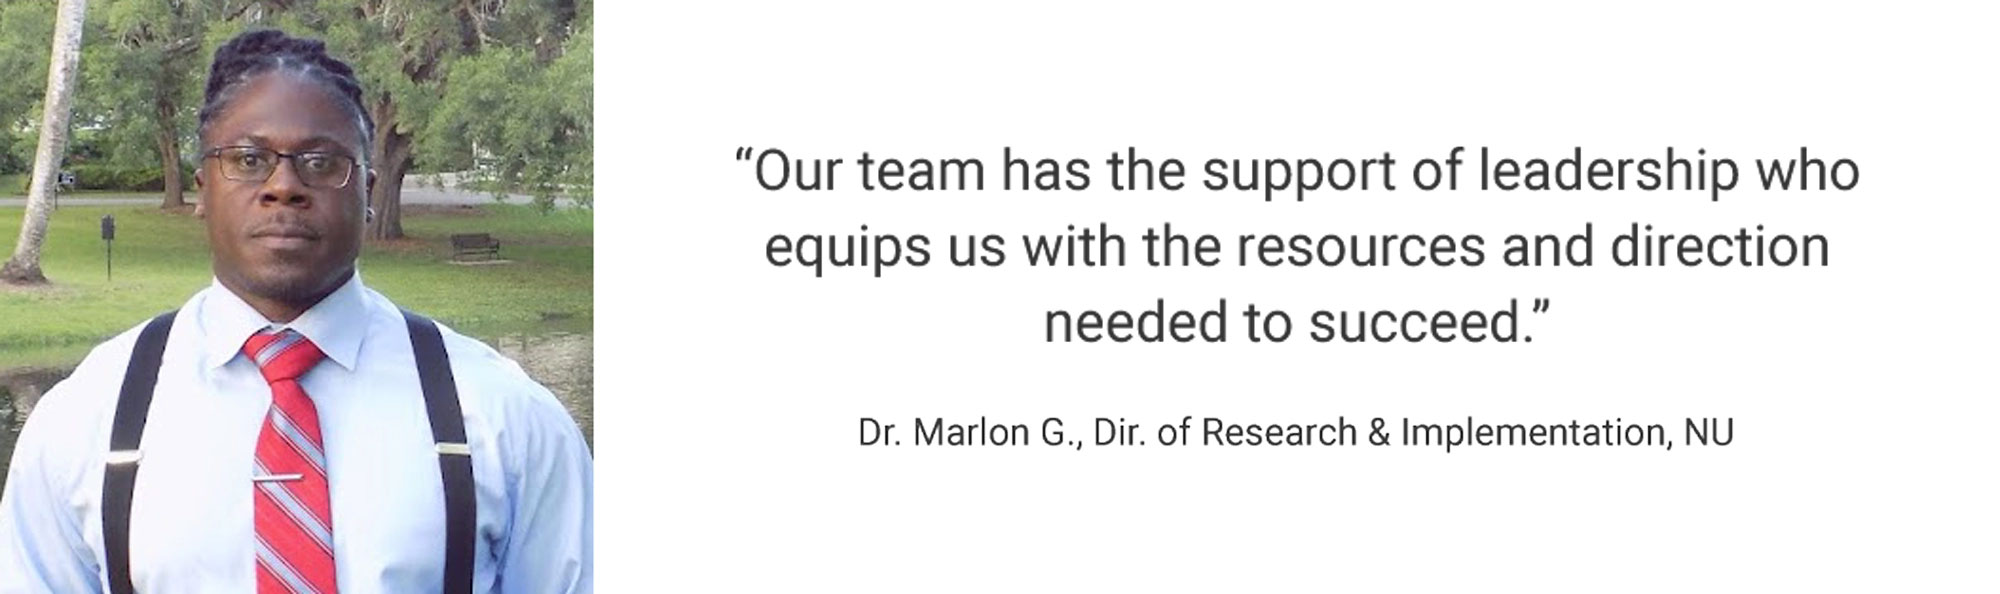 Employee Testimonial, "Our team has the support of leadership who equips us with the resources and direction needed to succeed." Dr. Marlon G., Dir. of Research & Implementation, NUS